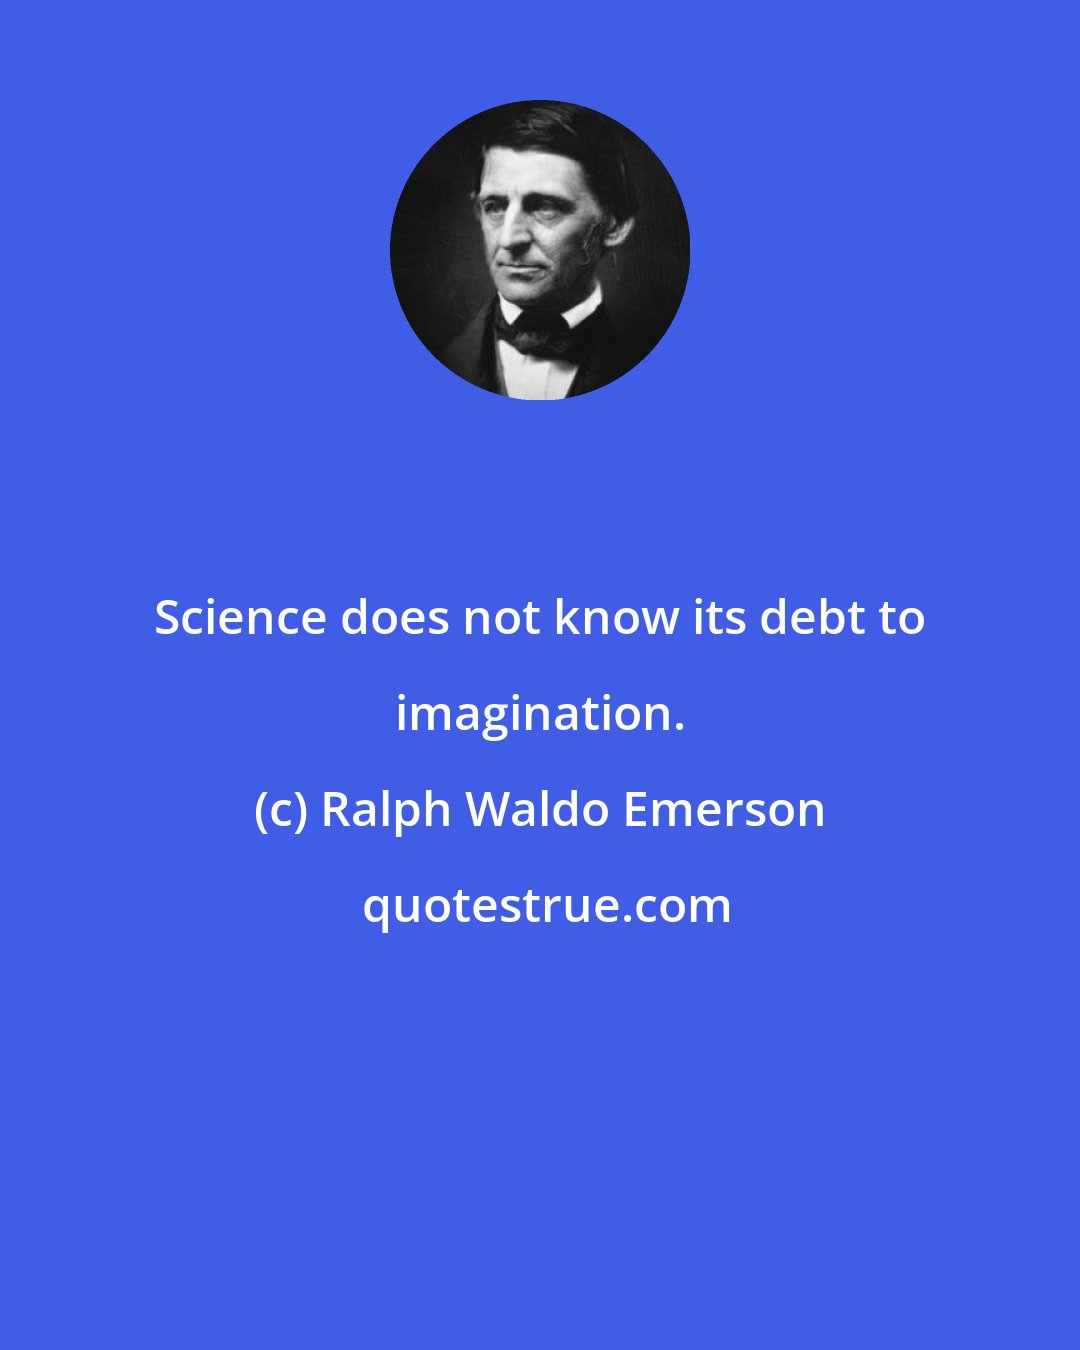 Ralph Waldo Emerson: Science does not know its debt to imagination.